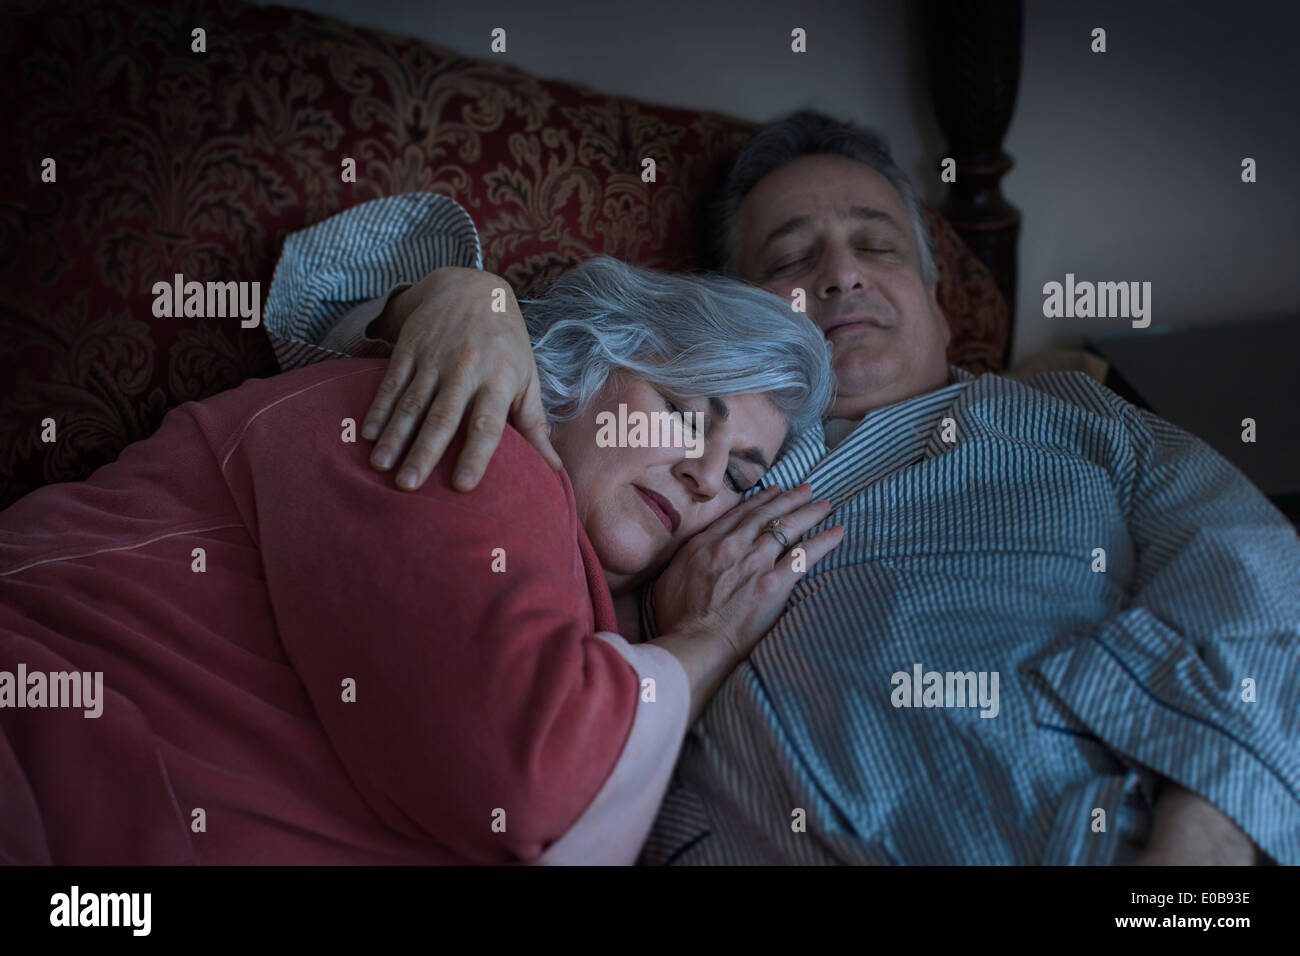 Affectionate mature adult couple sleeping on bed Stock Photo